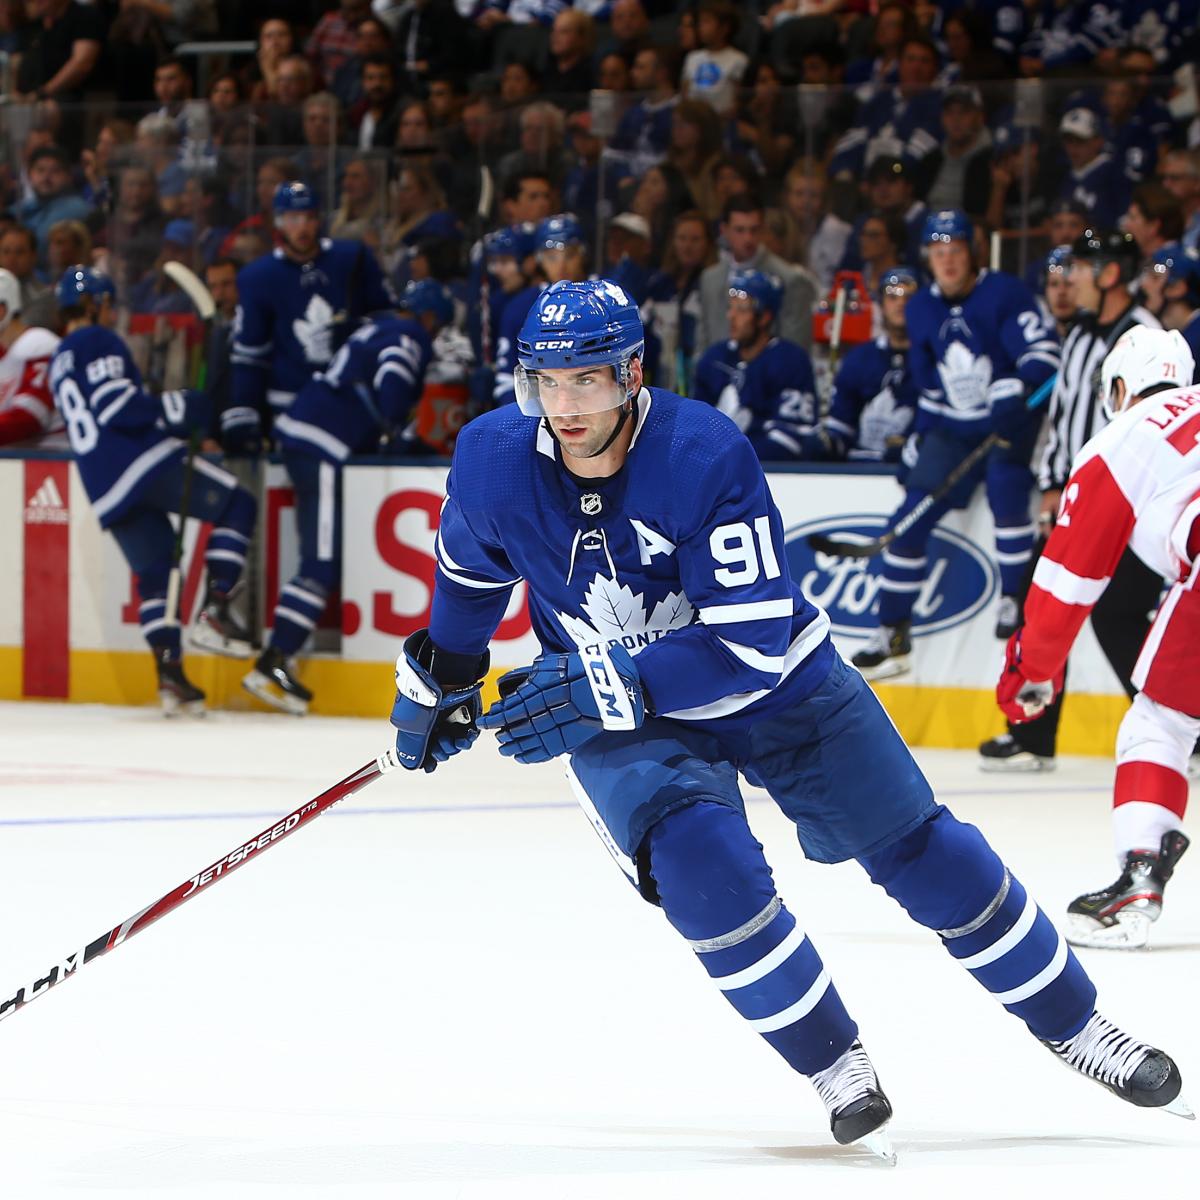 Critical update released on Leafs captain John Tavares - HockeyFeed